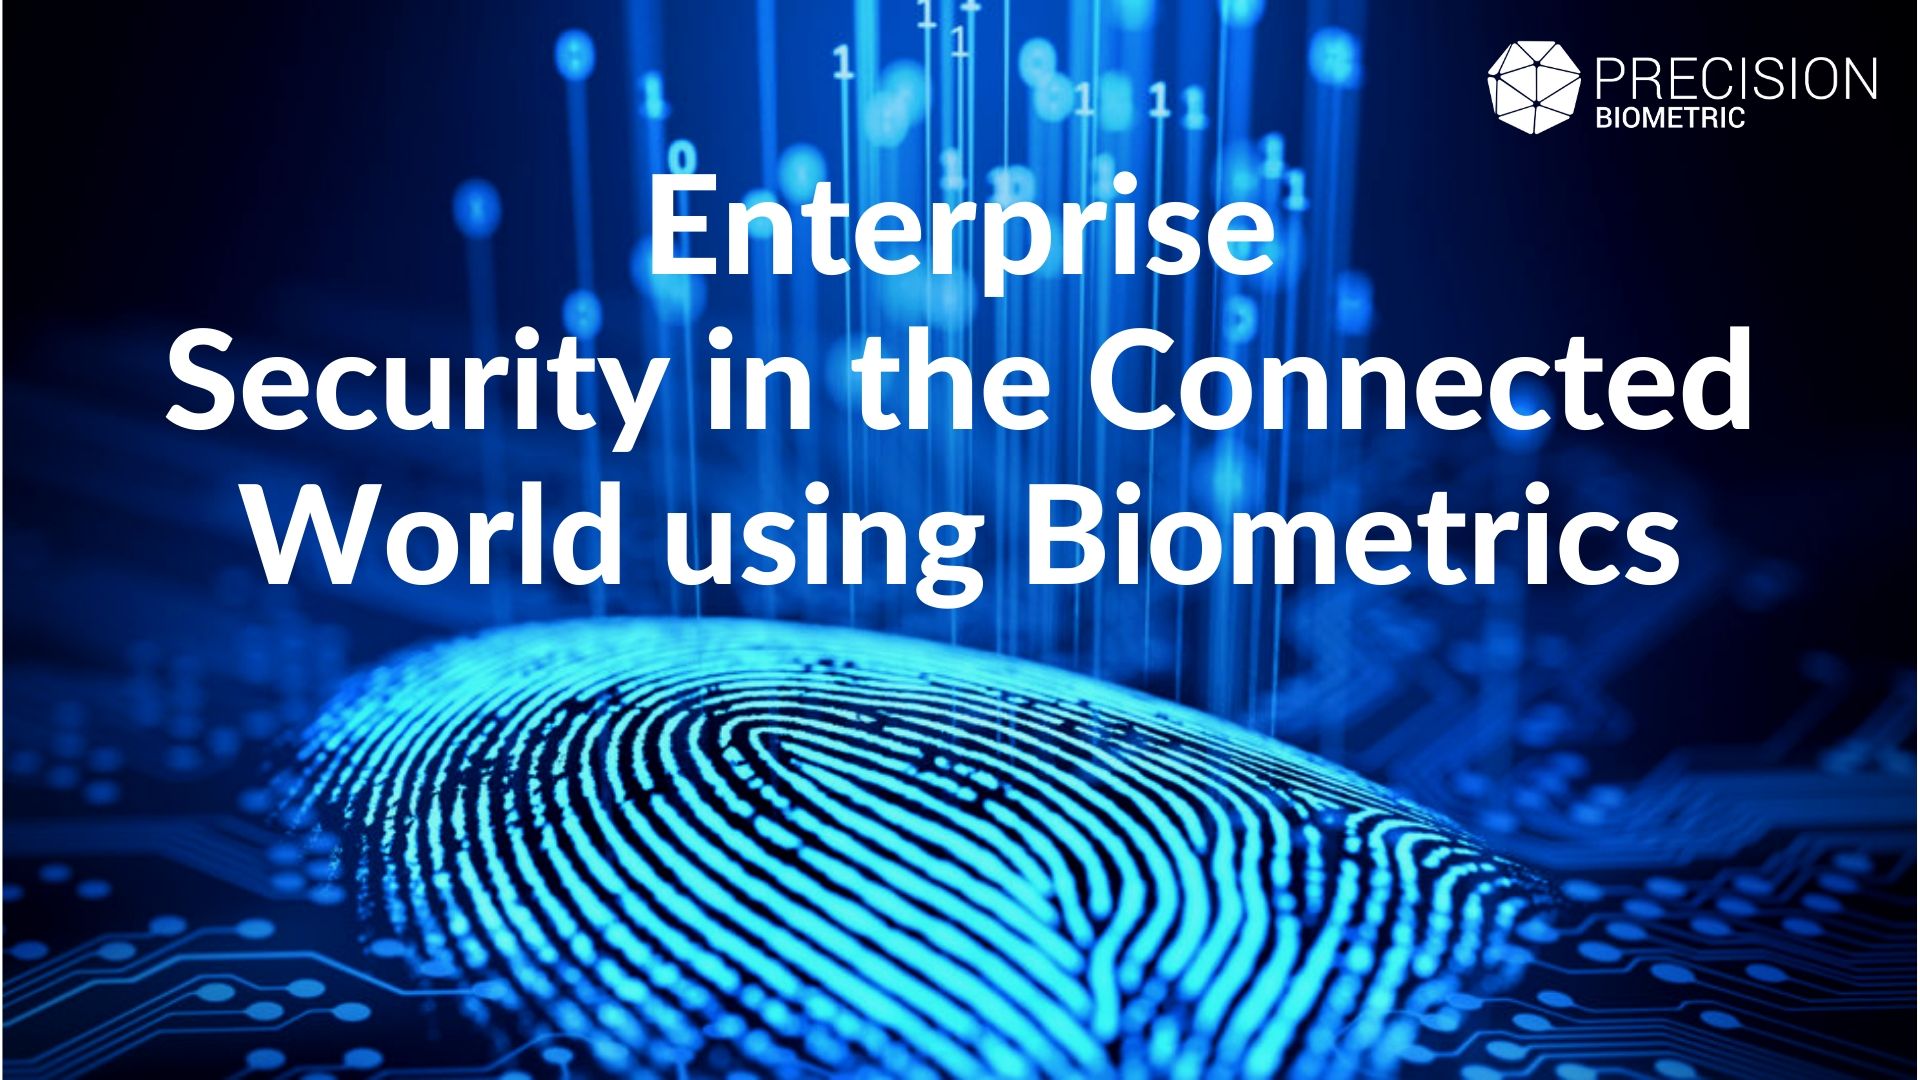 ENTERPRISE SECURITY IN THE CONNECTED WORLD USING BIOMETRICS